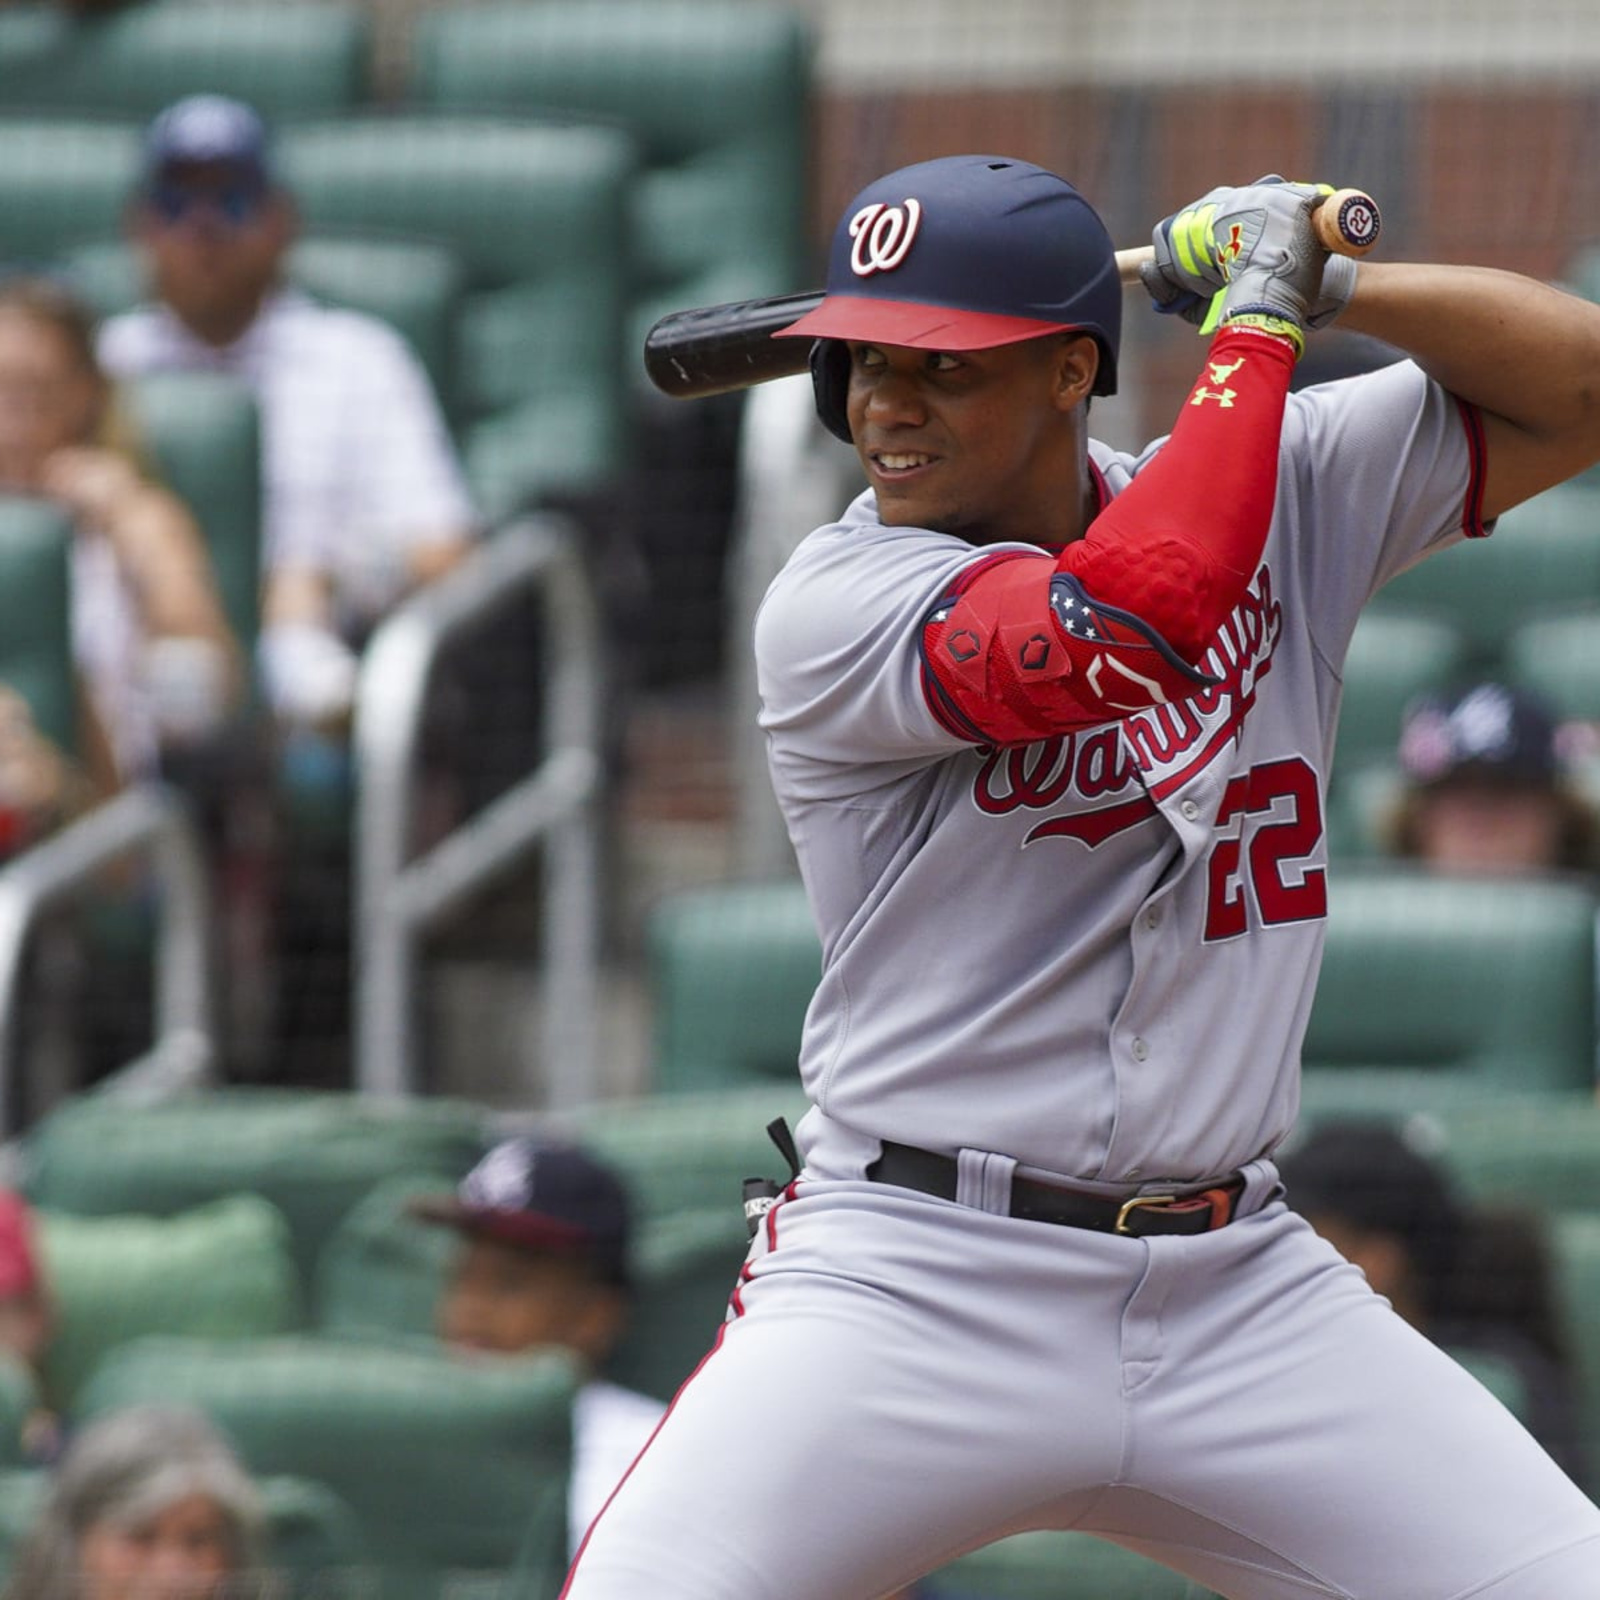 Yankees and Mets interested in trading for Juan Soto